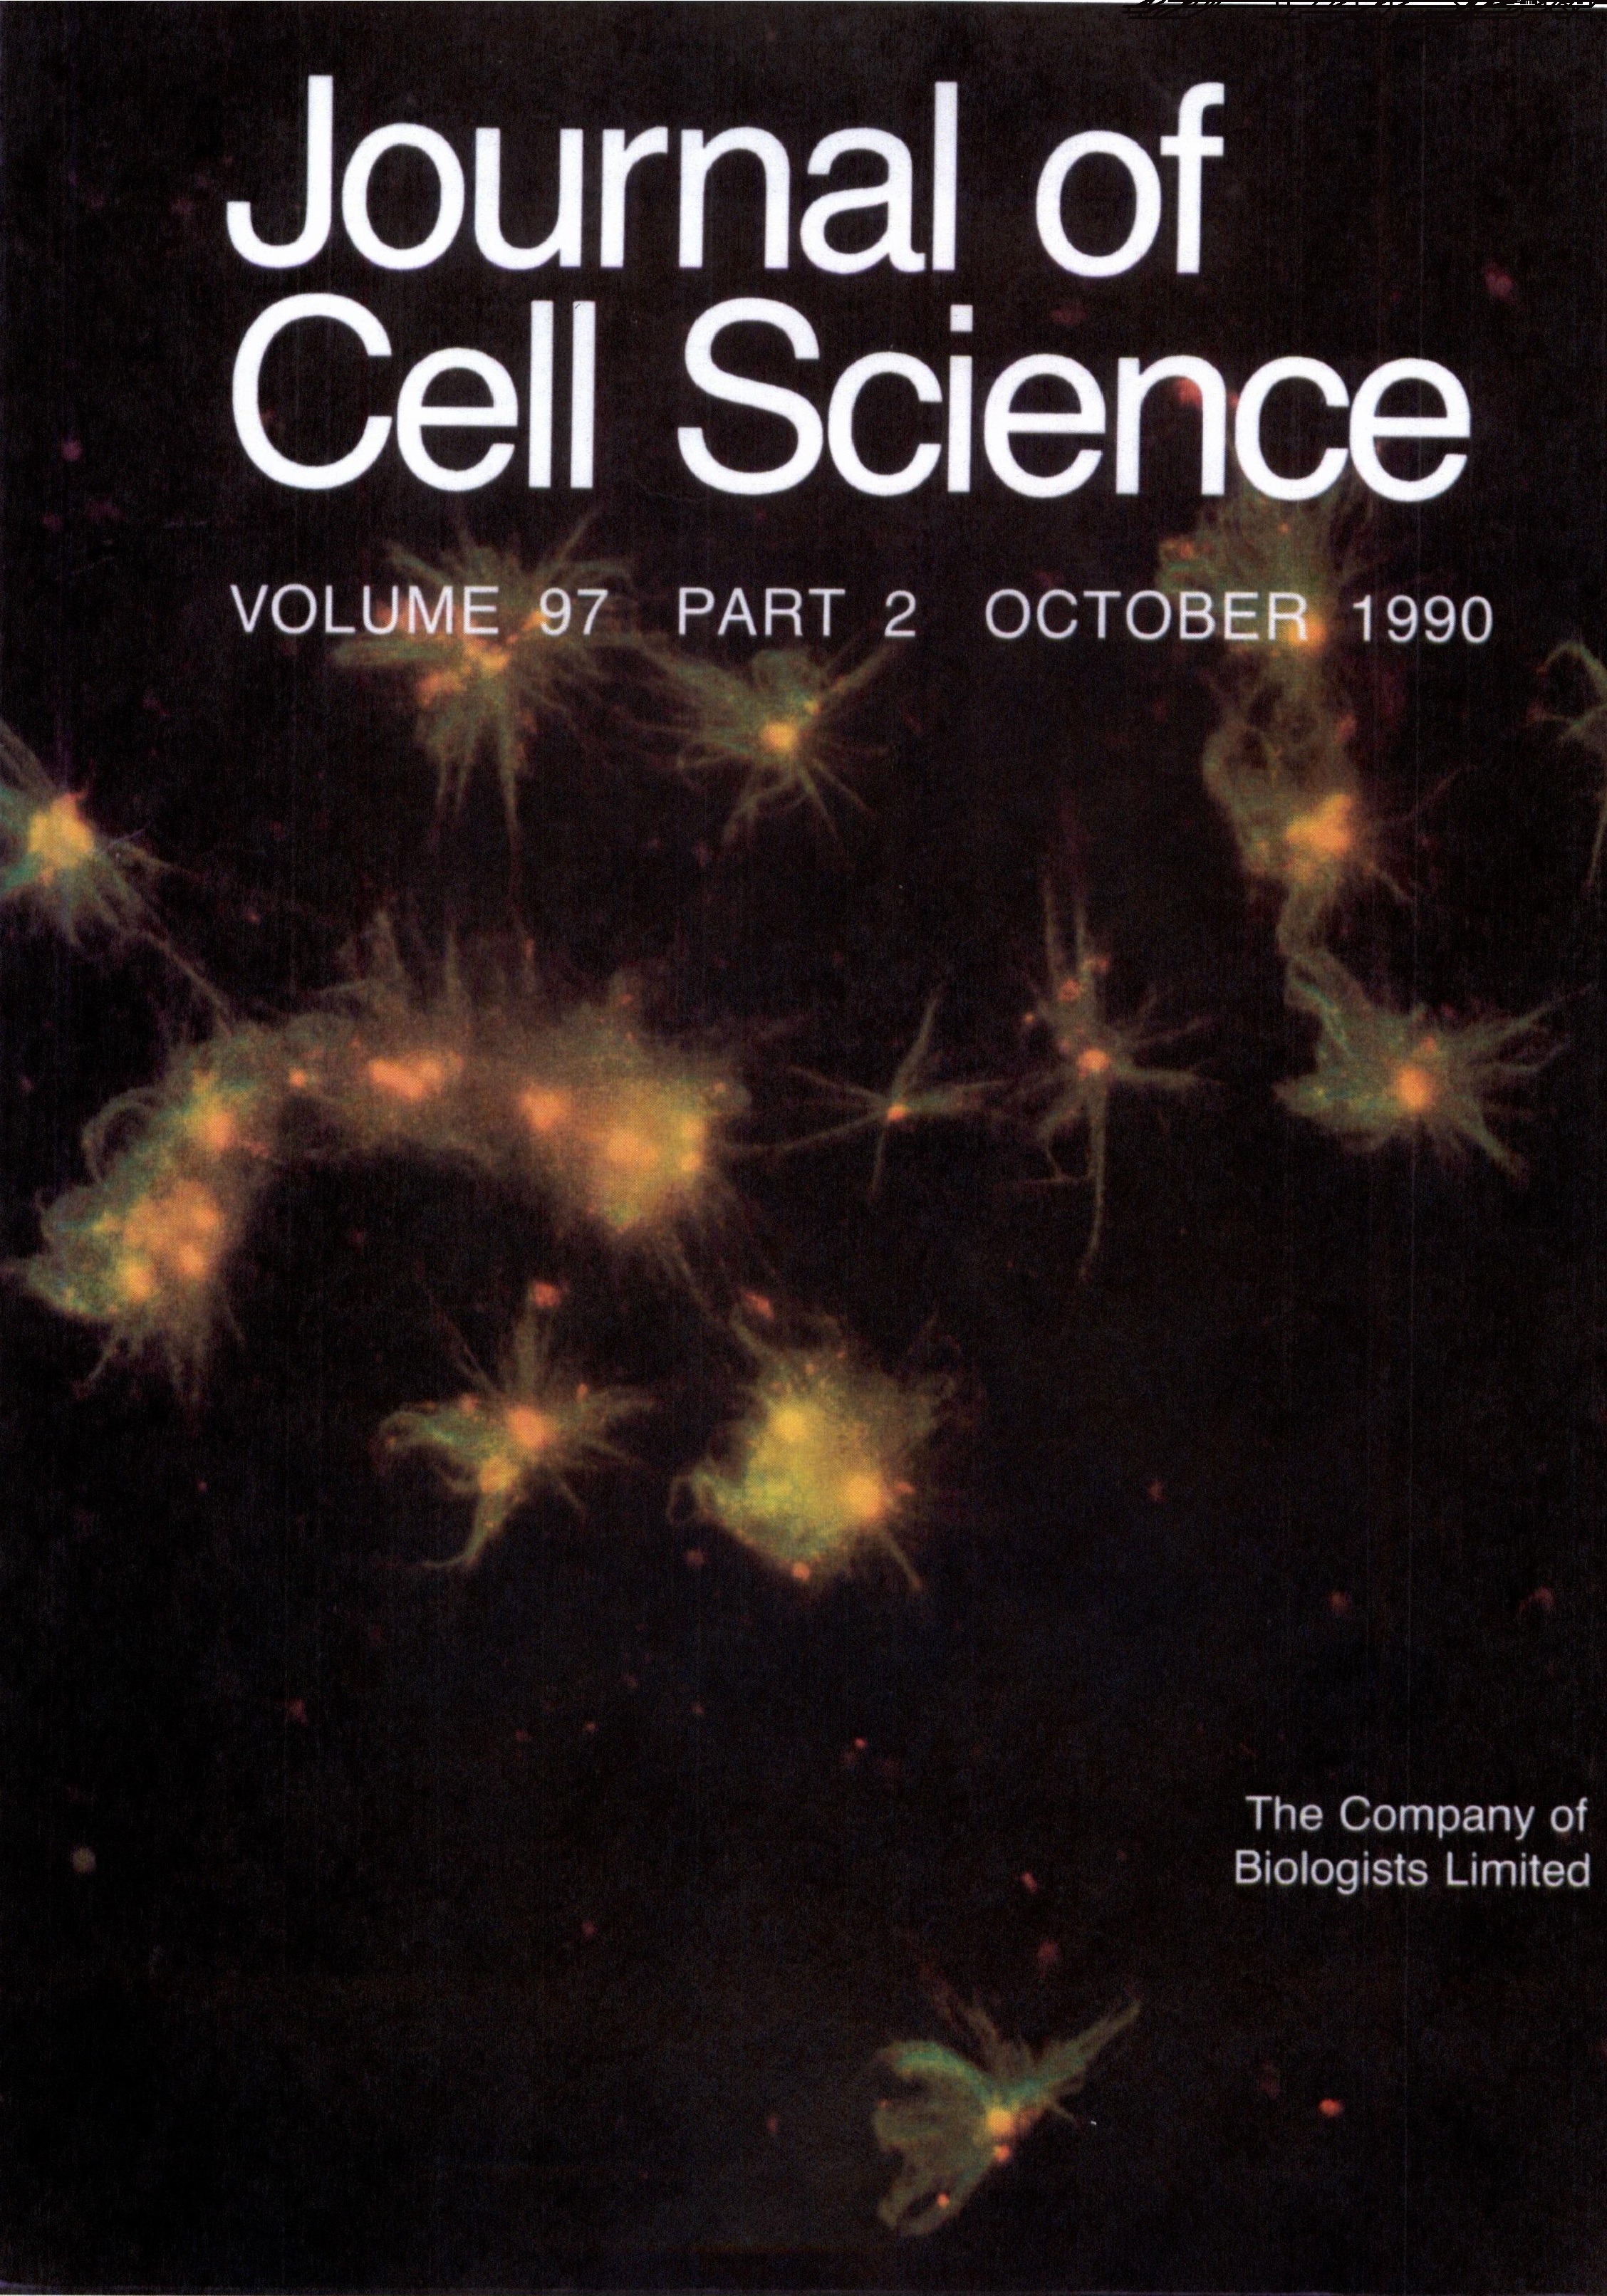 is cell research a good journal